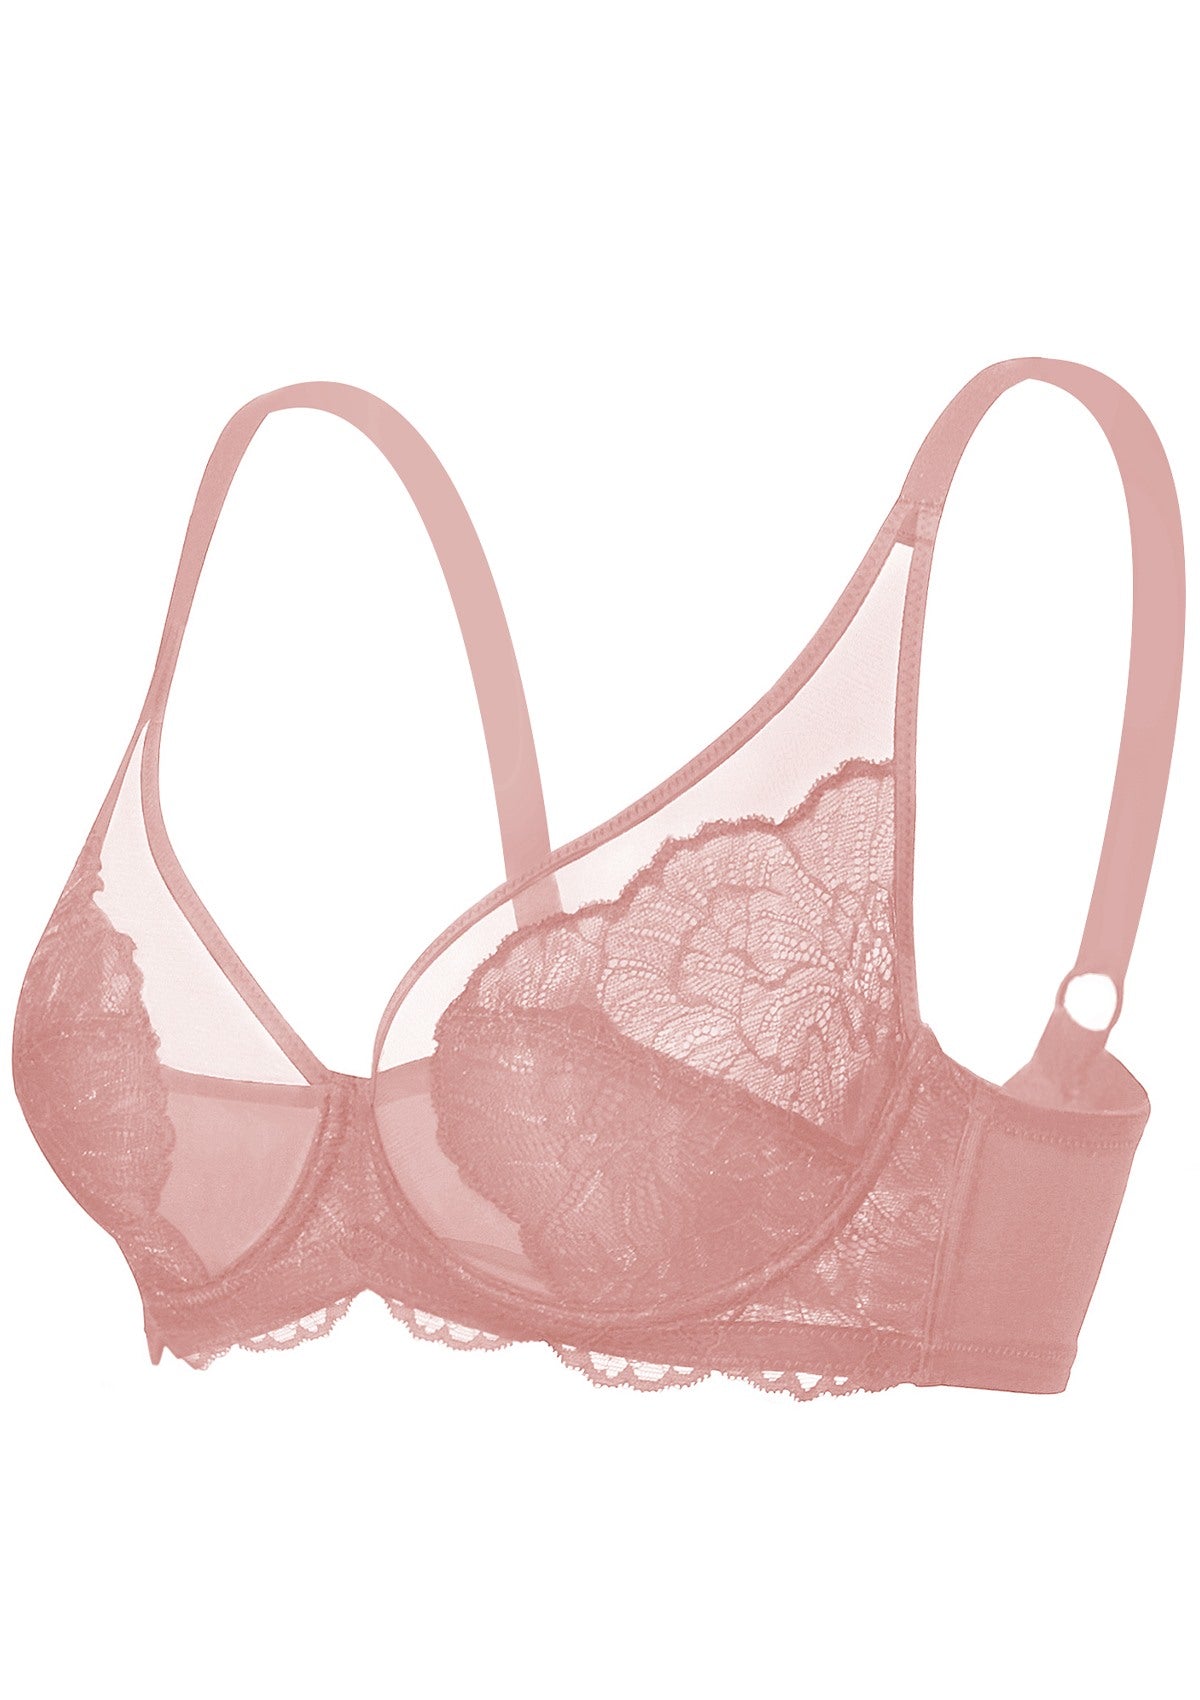 HSIA Blossom Unlined Lace Underwire Bra - Burgundy / 36 / D